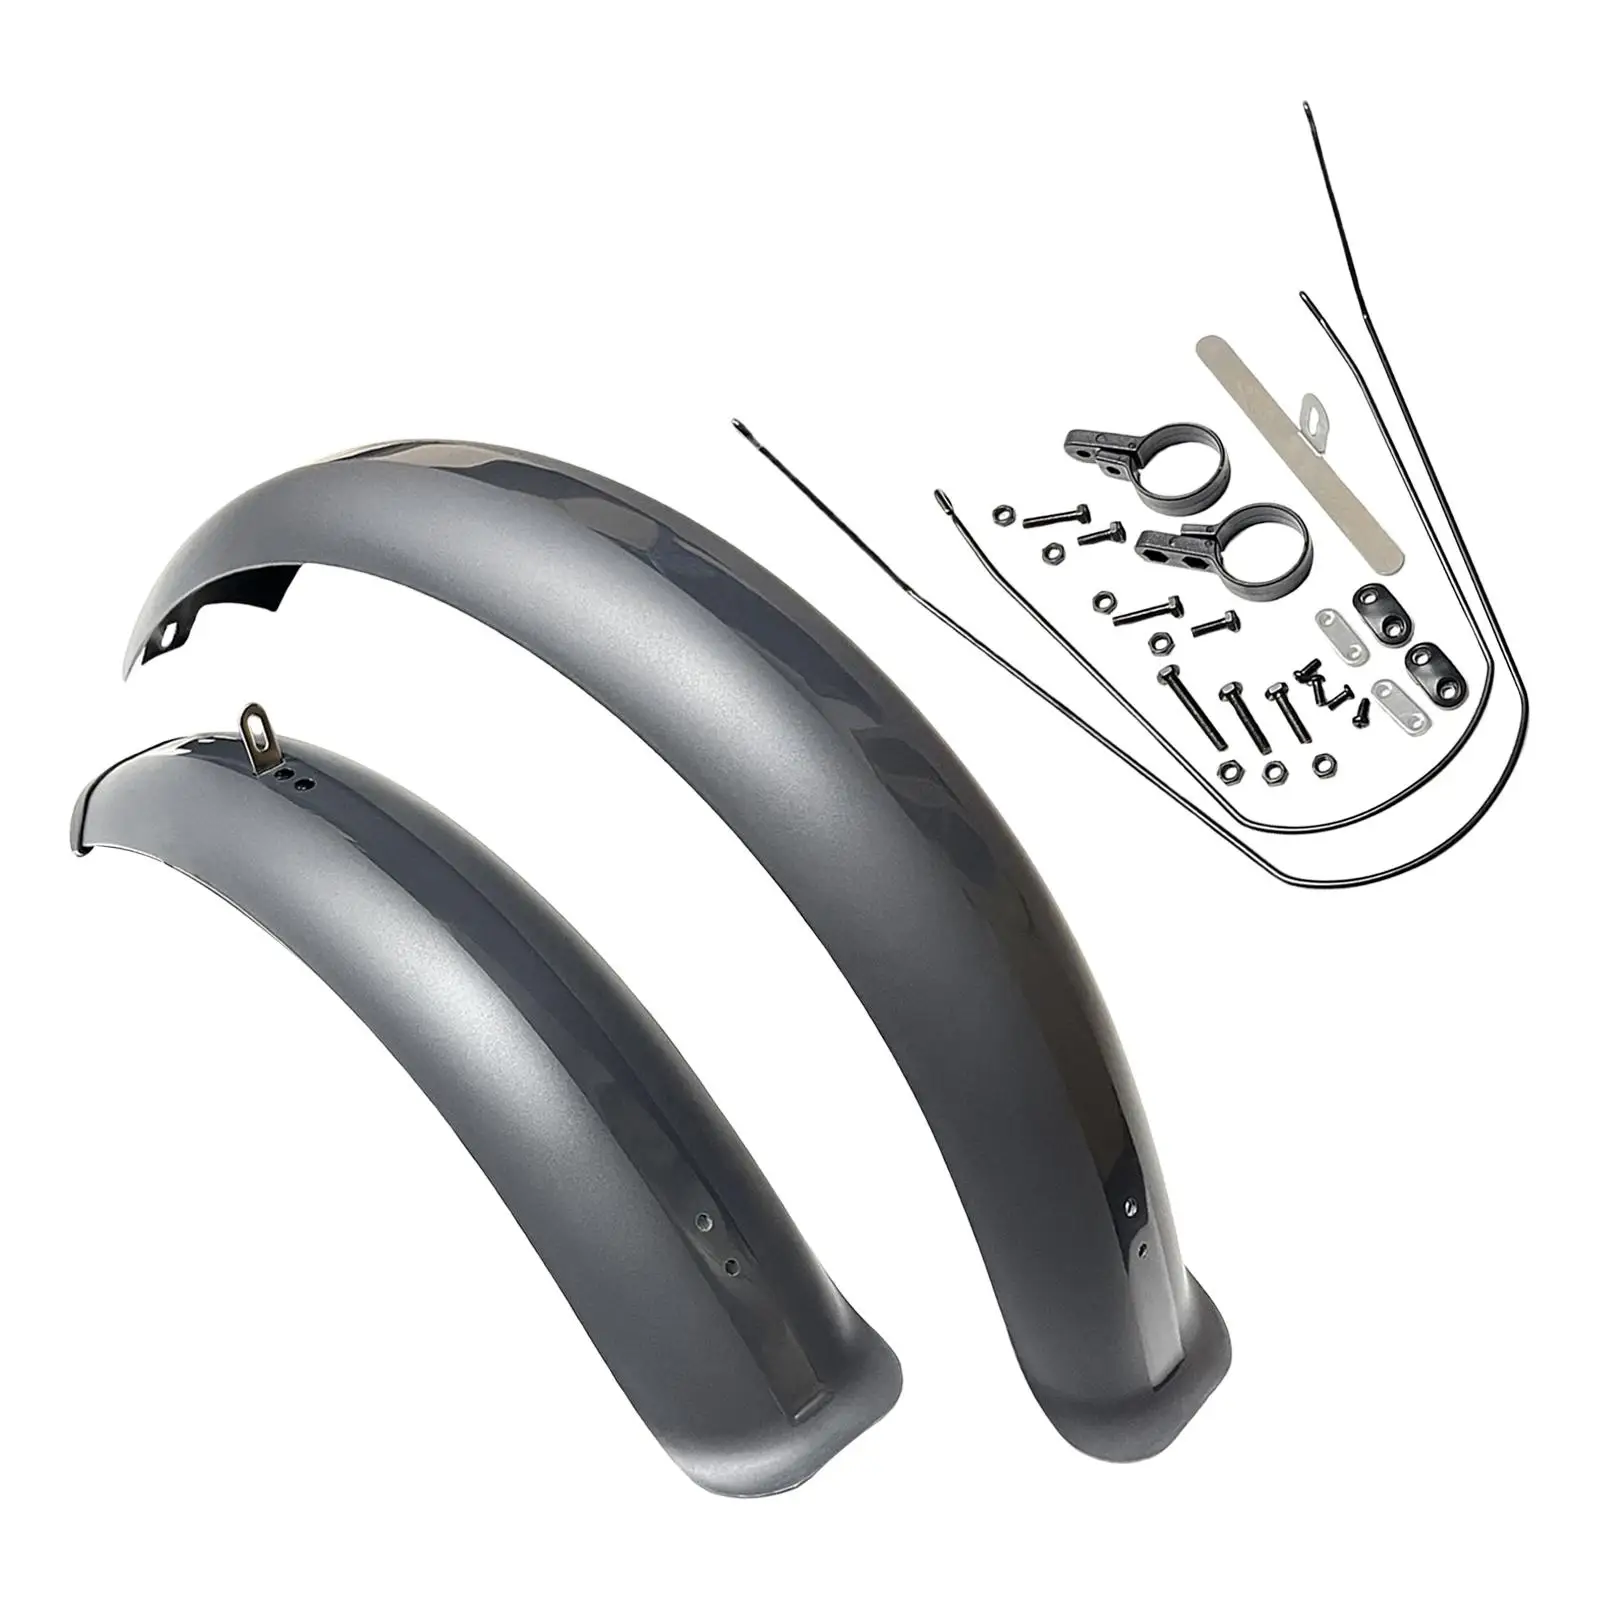 Bike Mudguard Front Rear Set Equipment Easy to Install Spare Parts Mudflap for